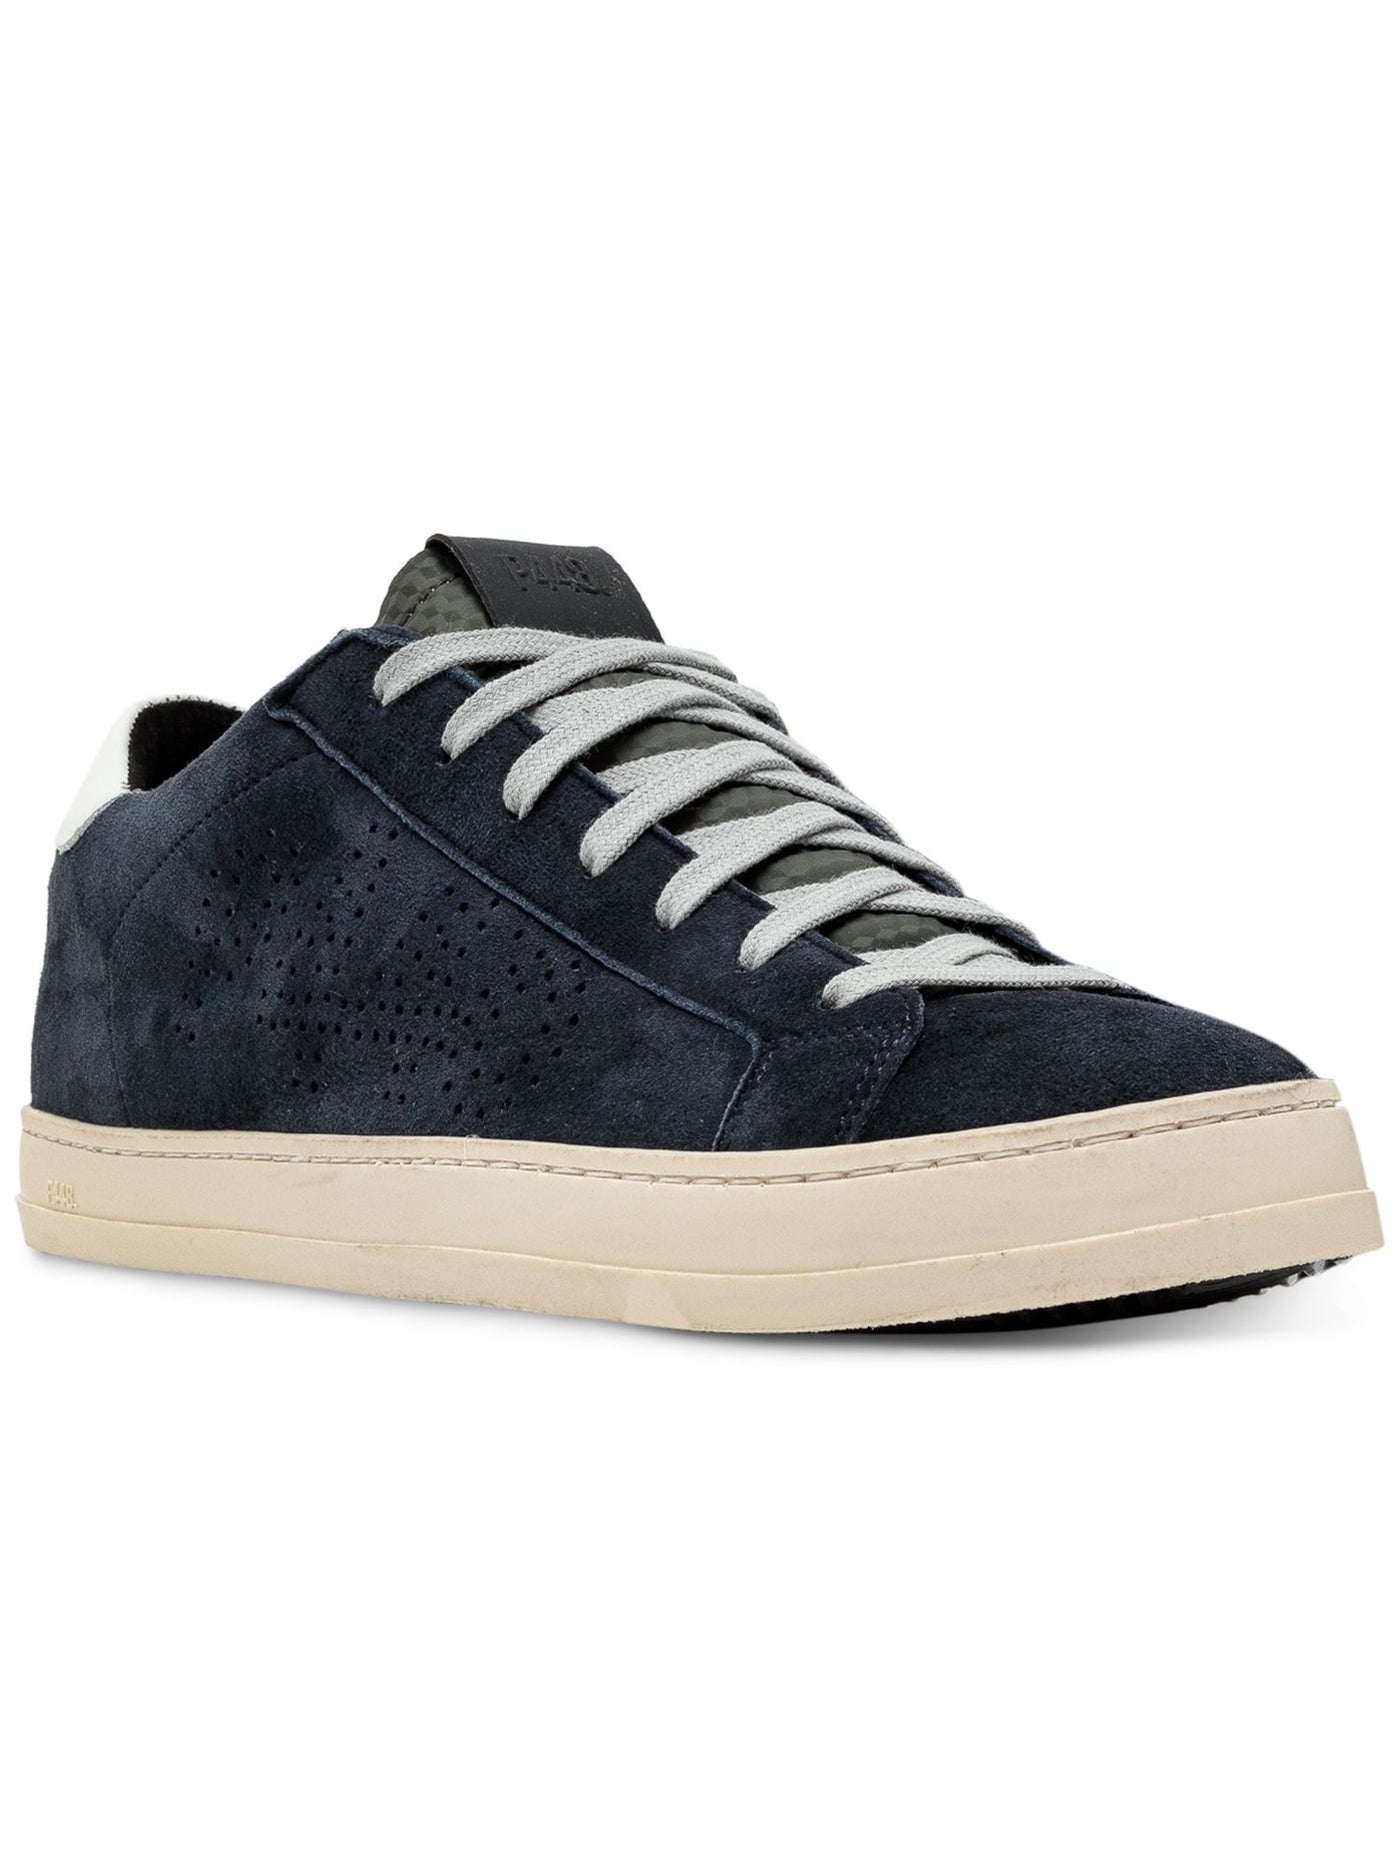 P448 Mens Navy Perforated Padded John Round Toe Platform Lace-Up Leather Sneakers Shoes 45